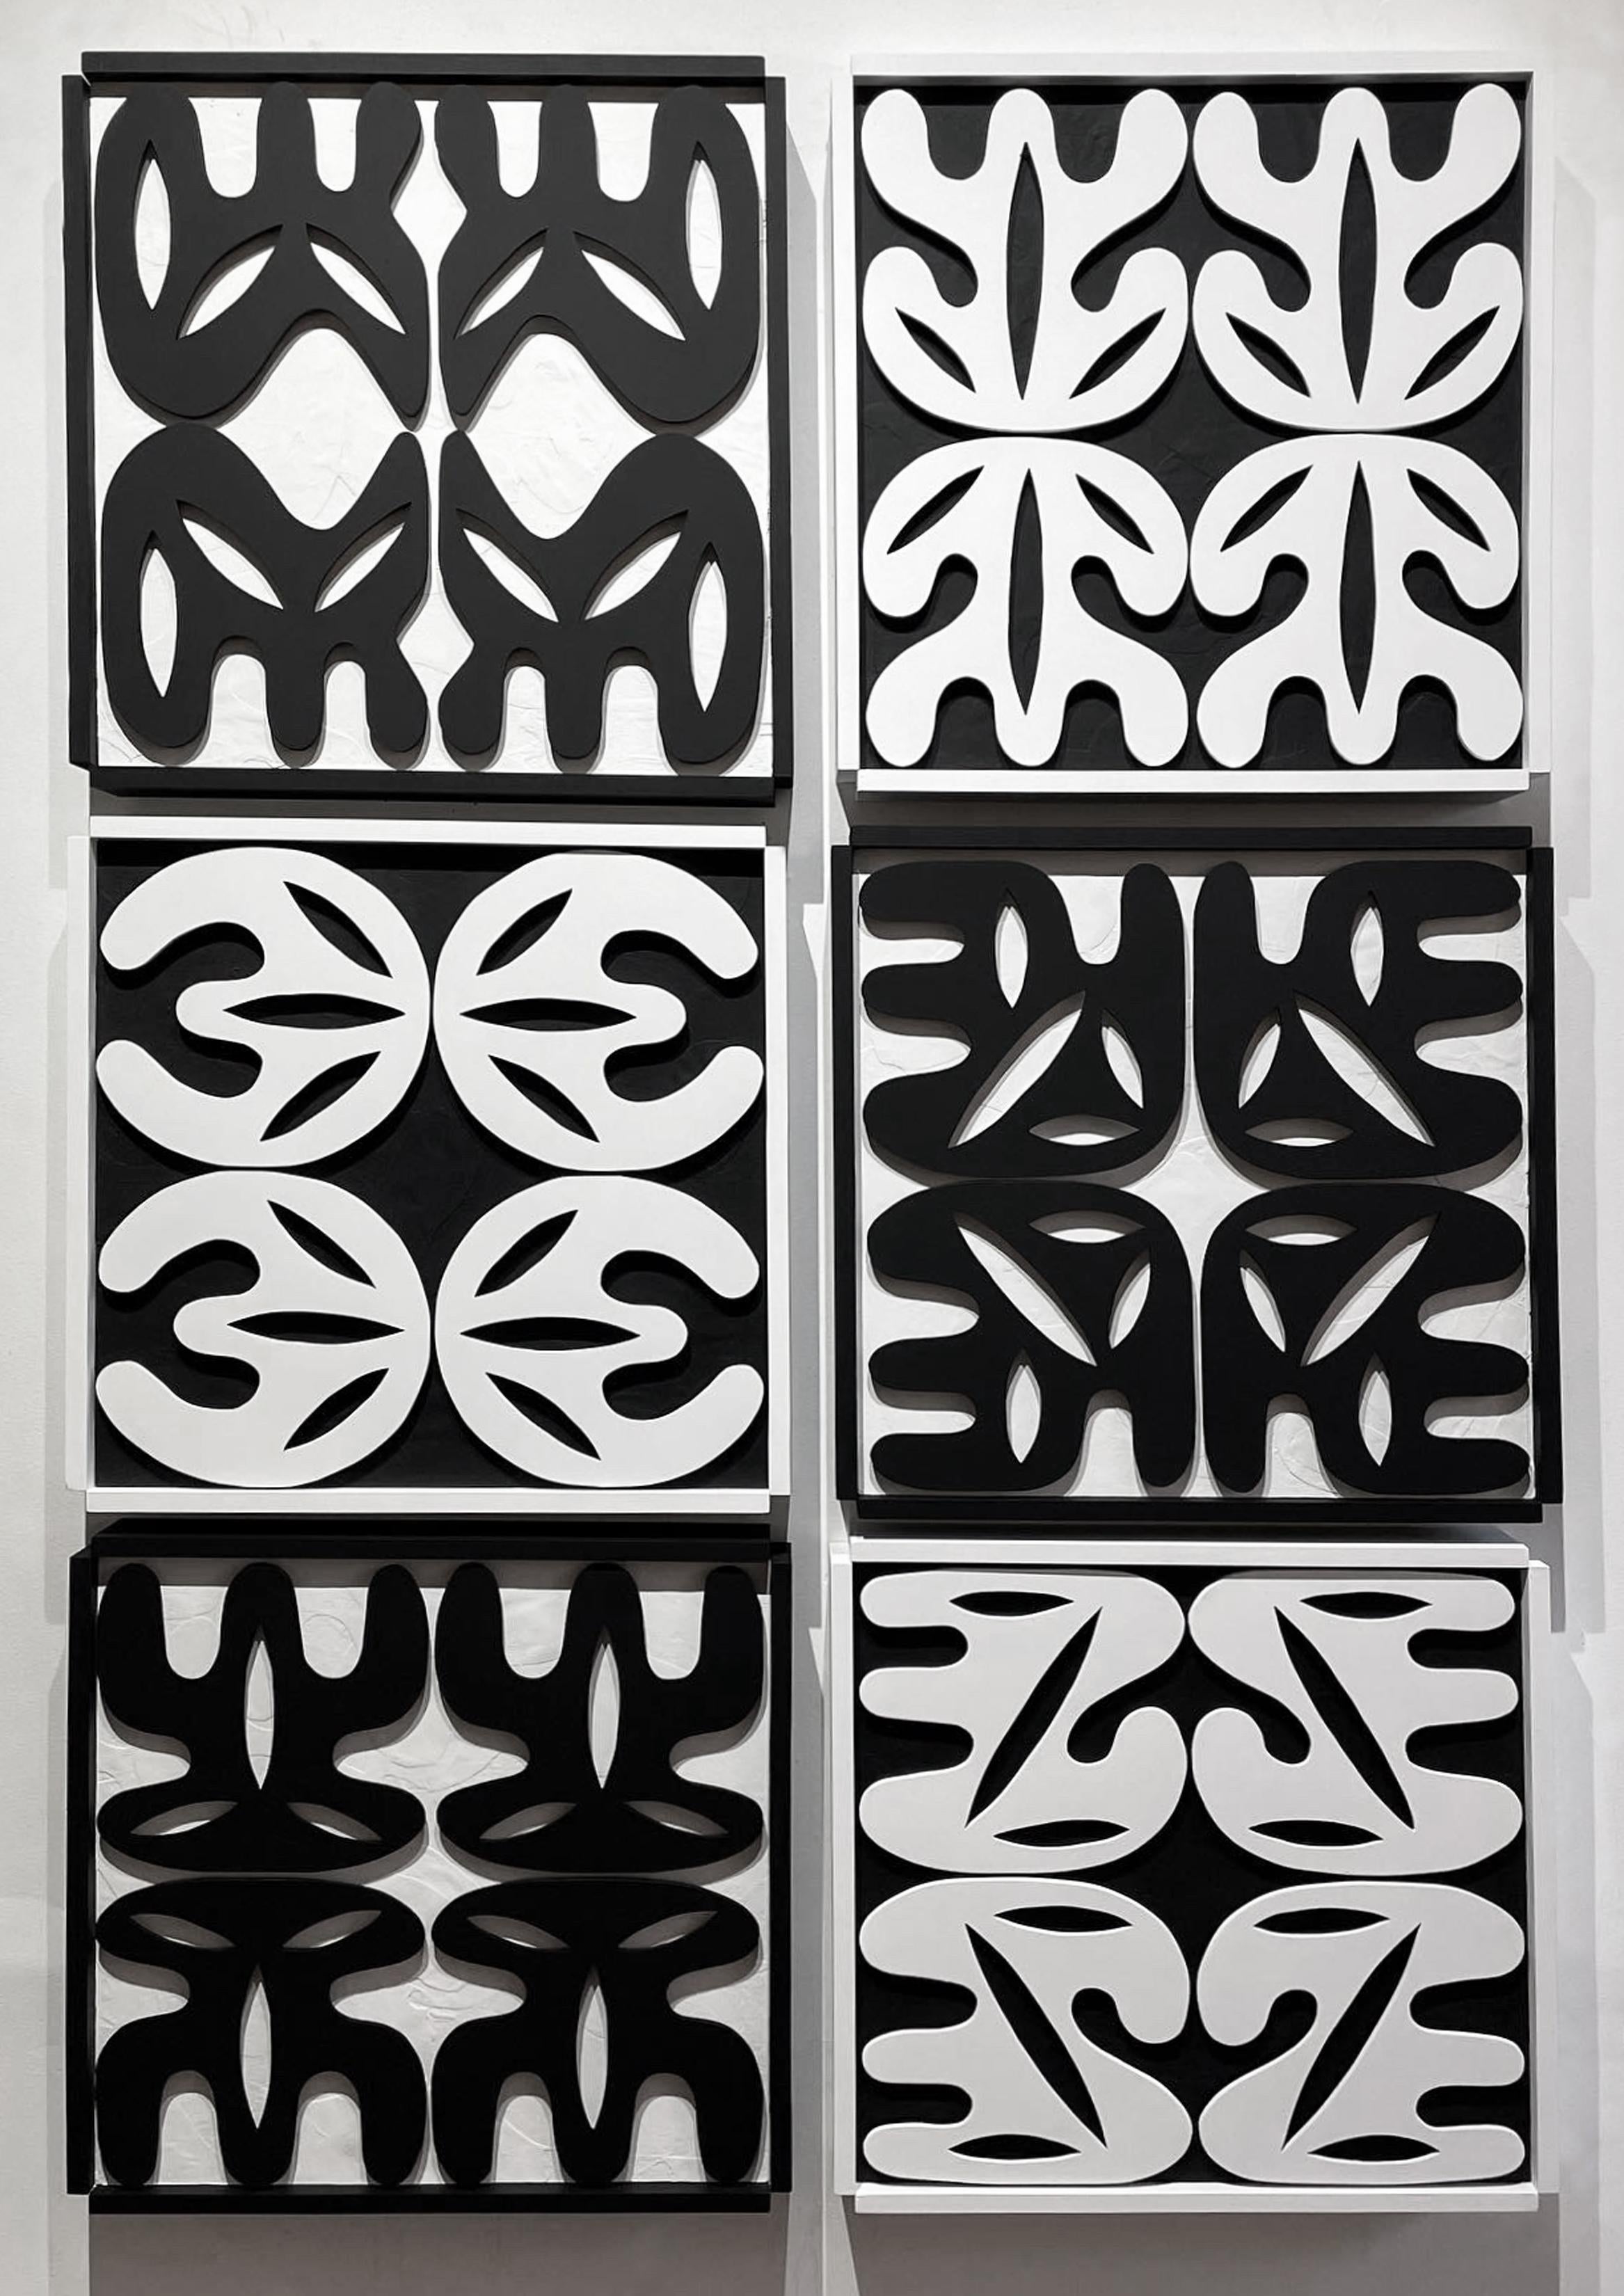 'Mumbo Jumbo' - large-scale abstract, 3-D, sculptural, black and white, wood